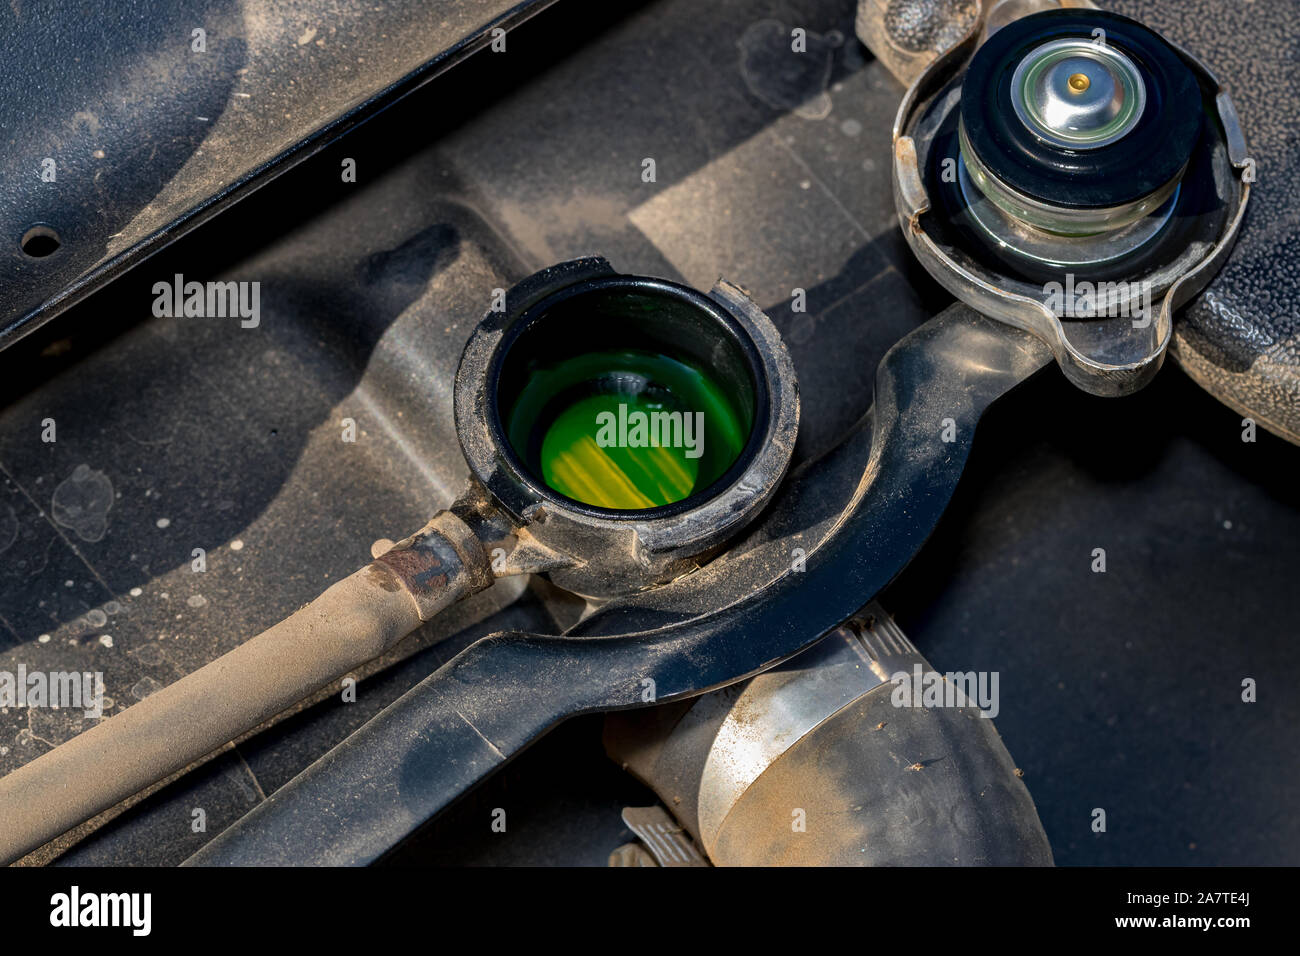 Cooling system radiator with cap removed showing green antifreeze coolant level. Concept of automotive and lawn equipment maintenance and repair Stock Photo